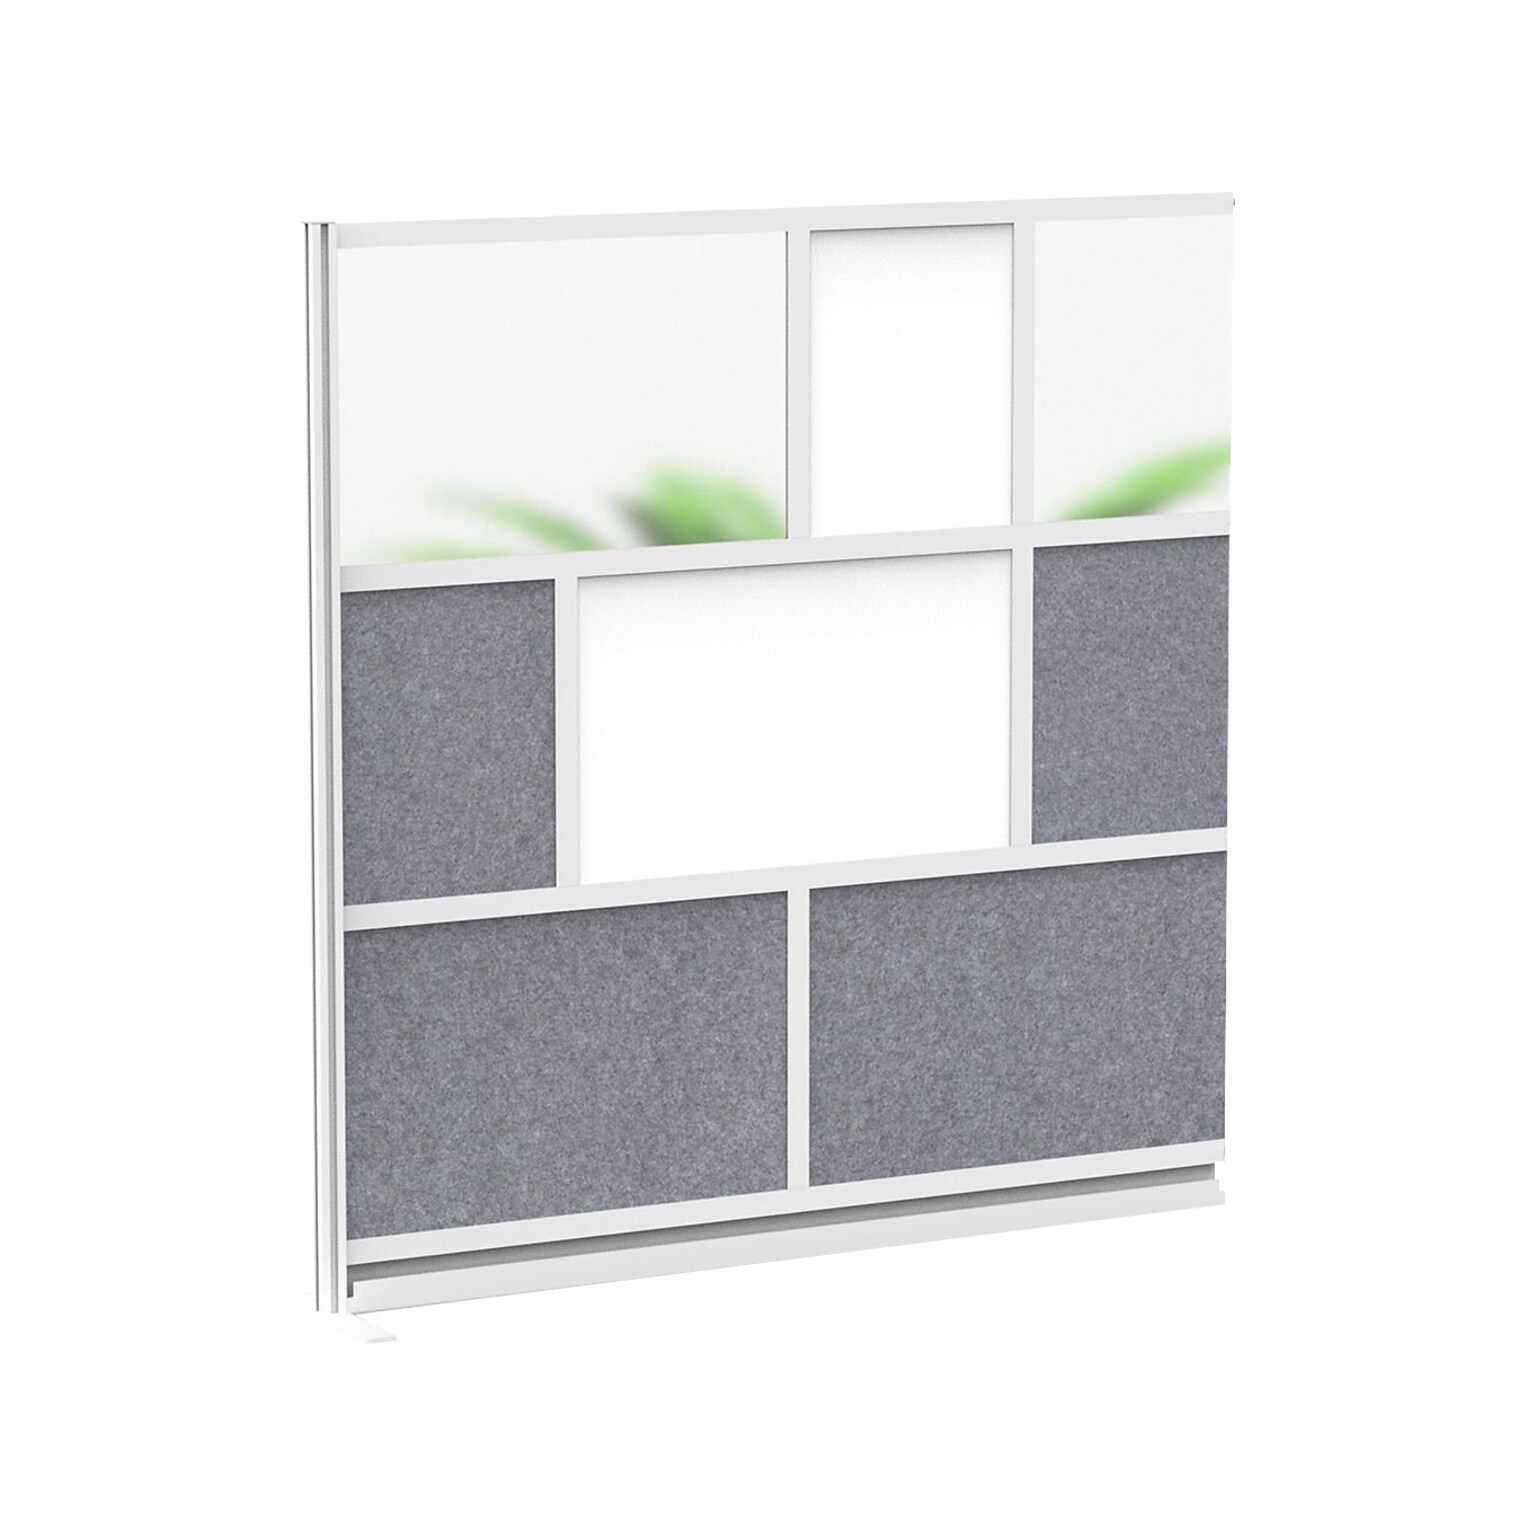 Luxor Workflow Series 8-Panel Modular Room Divider System Add-On Wall with Whiteboard, 70H x 70W, Gray/Silver